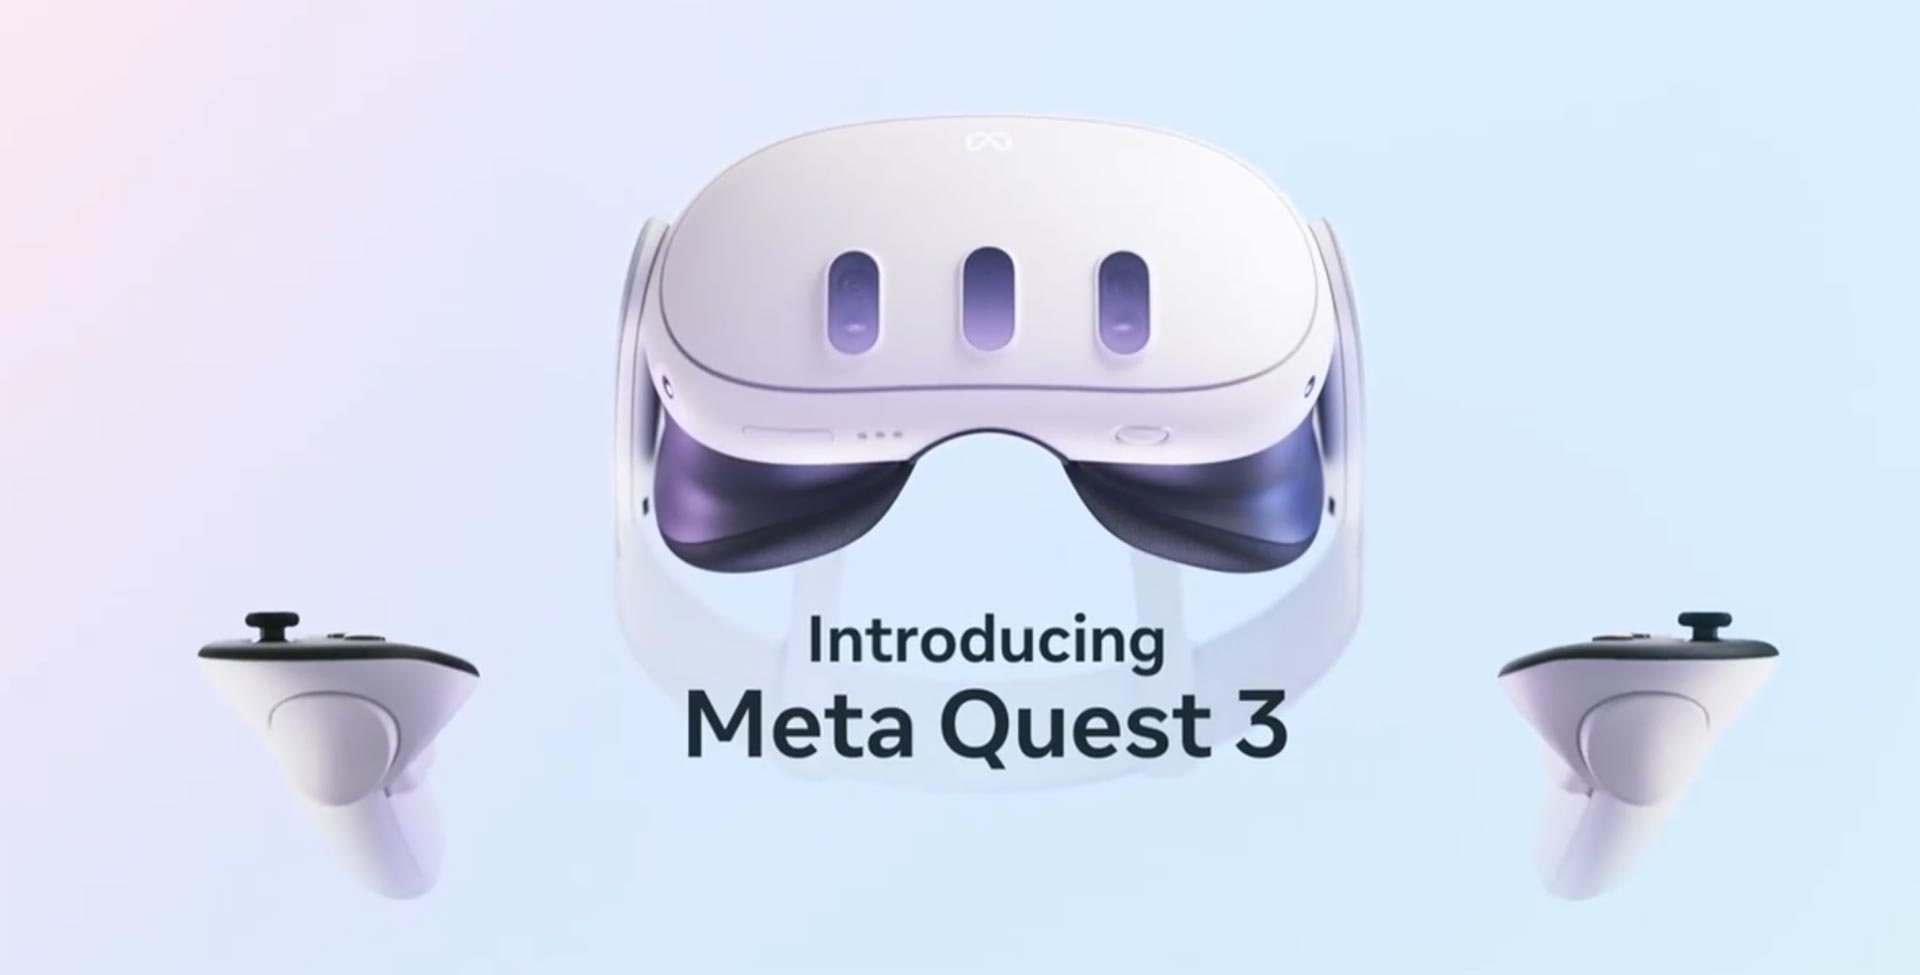 Quest 3 Specs may have all already been leaked